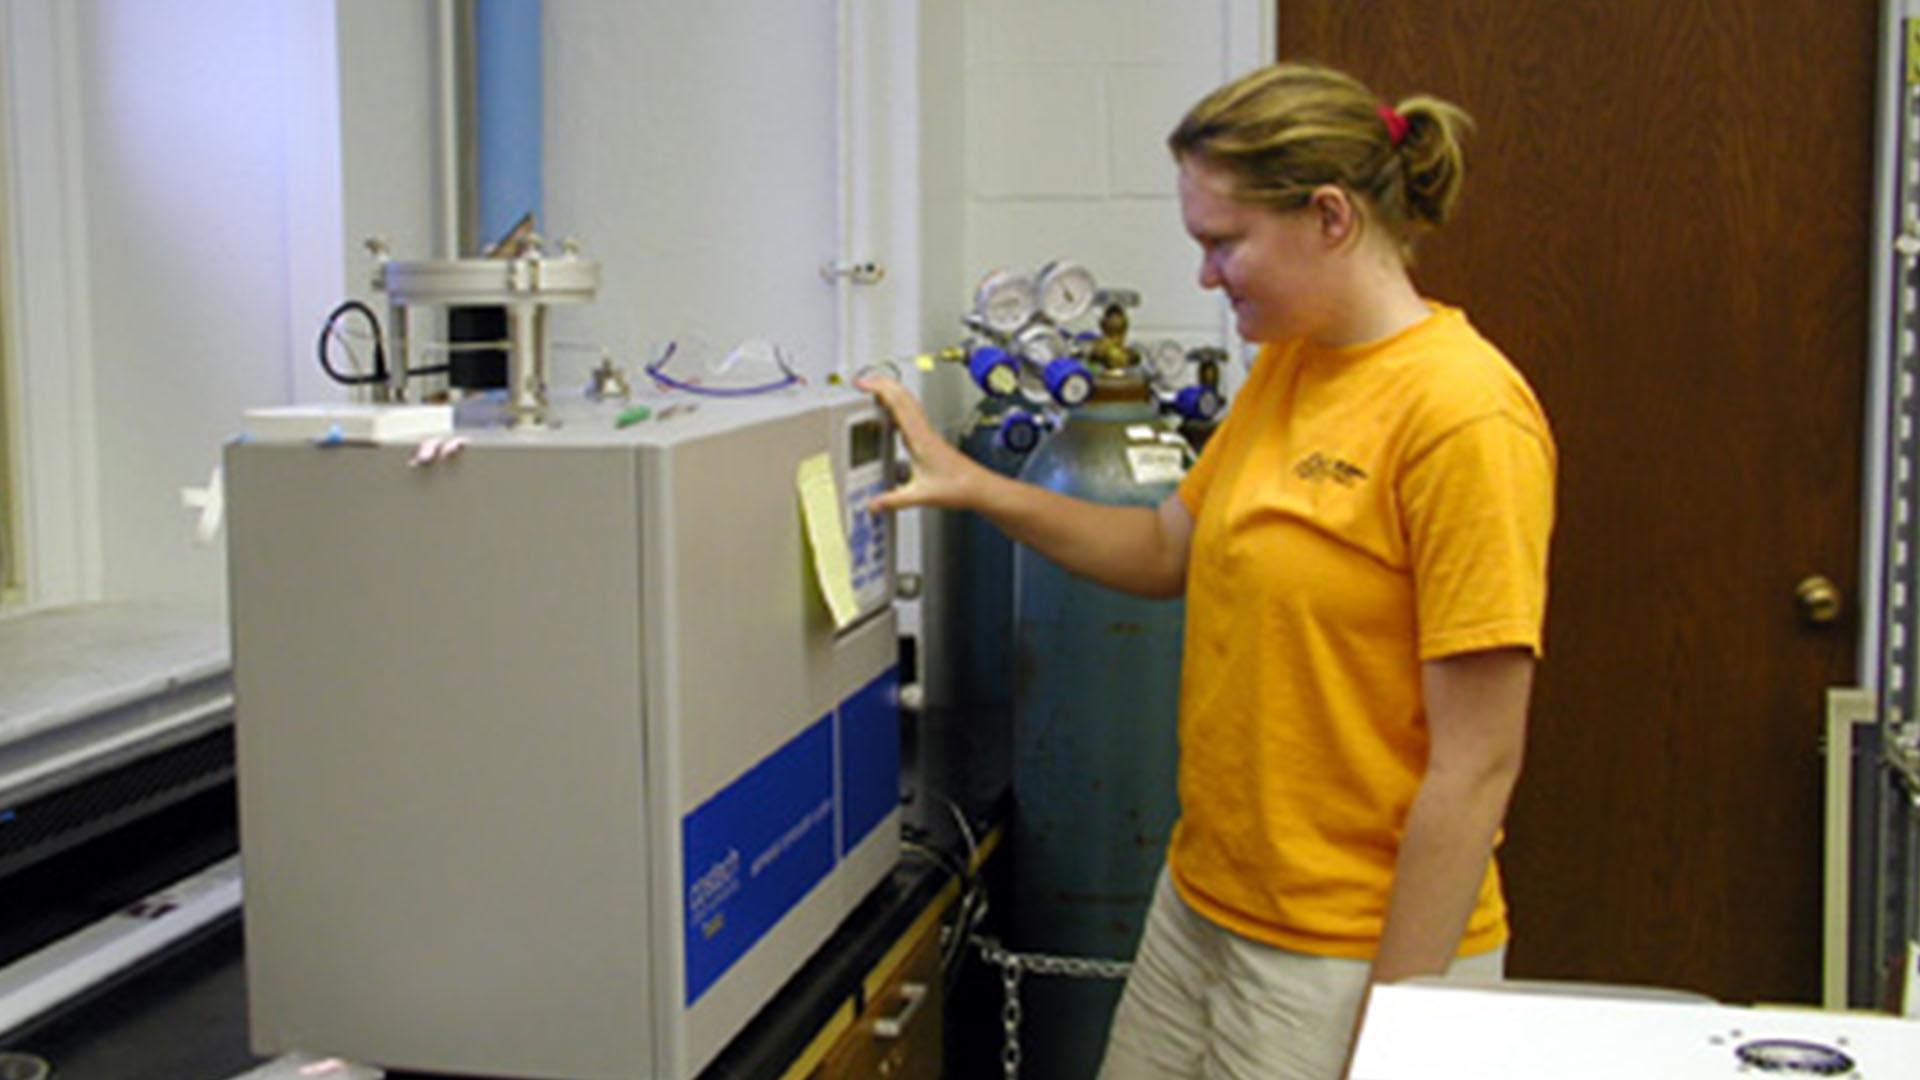 Student using stable isotope mass spectrometer in lab.